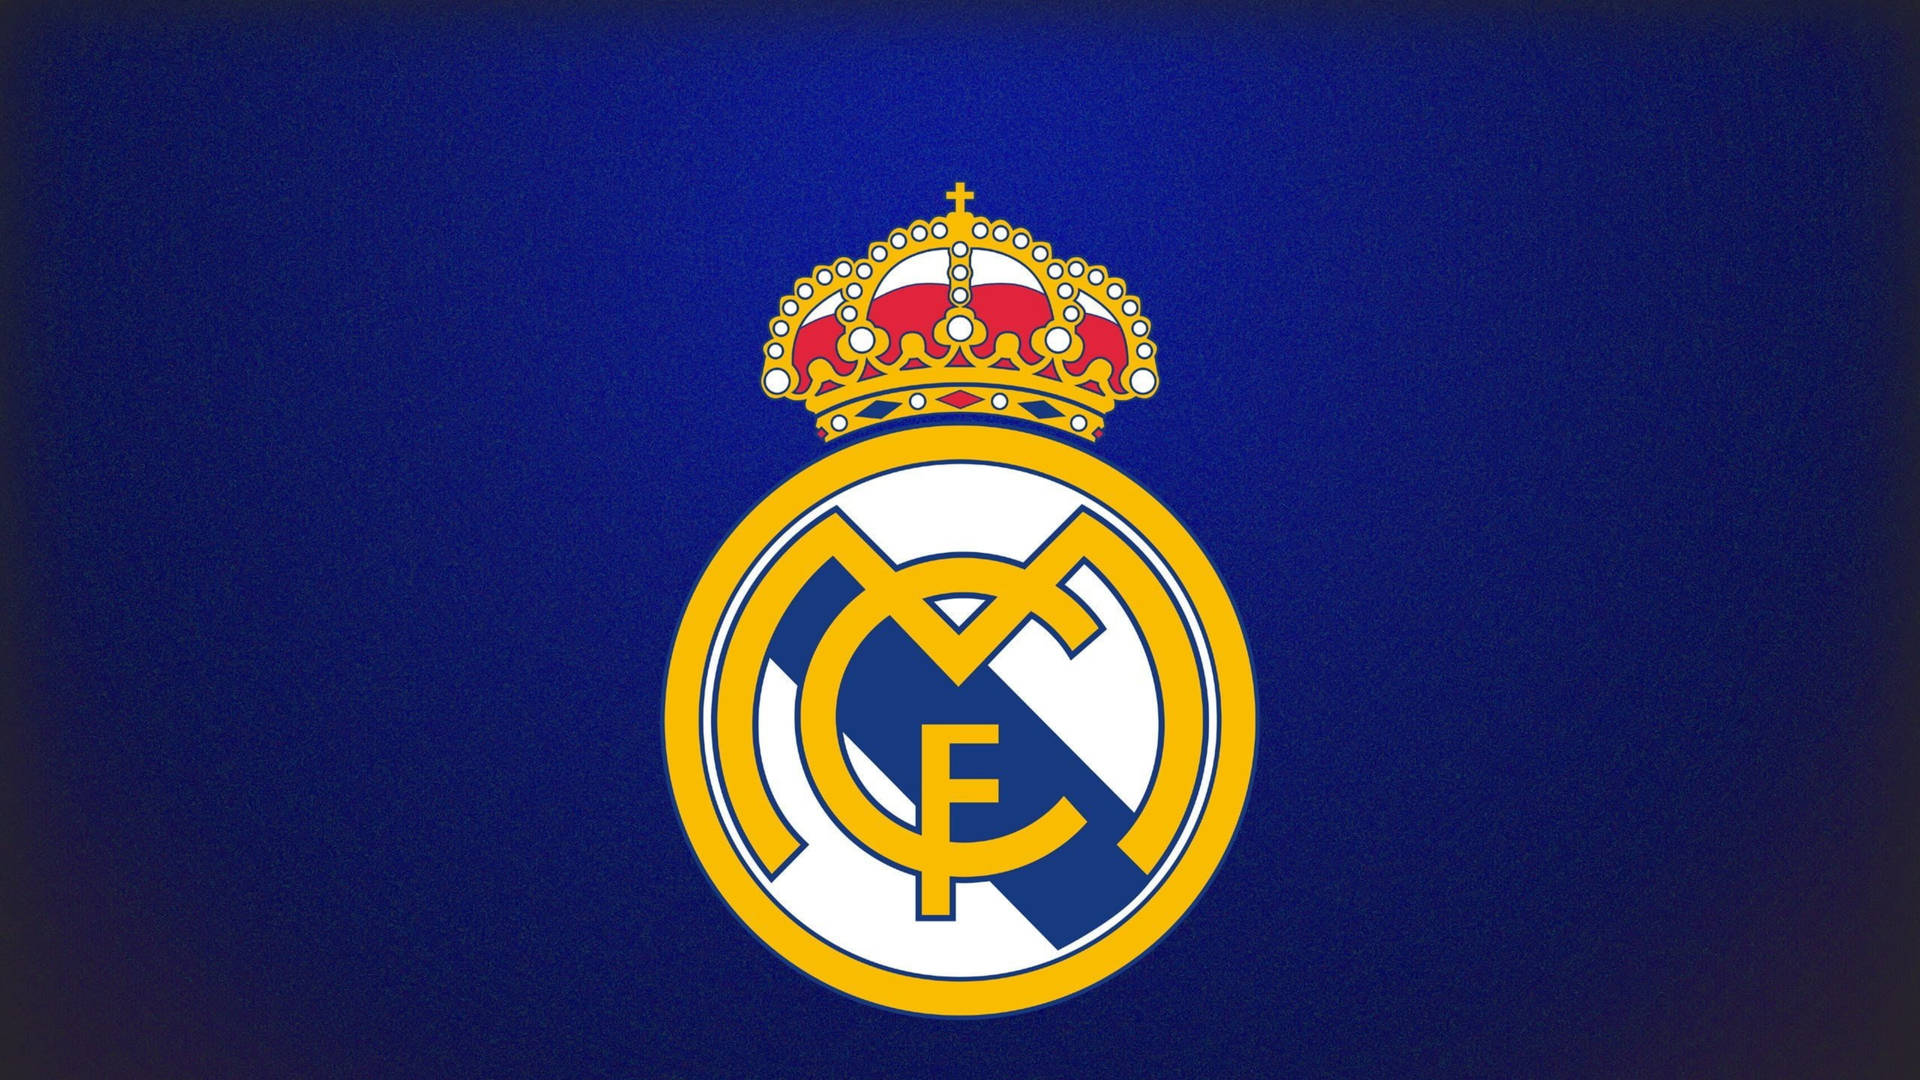 Top 999+ Real Madrid 4k Wallpaper Full HD, 4K Free to Use